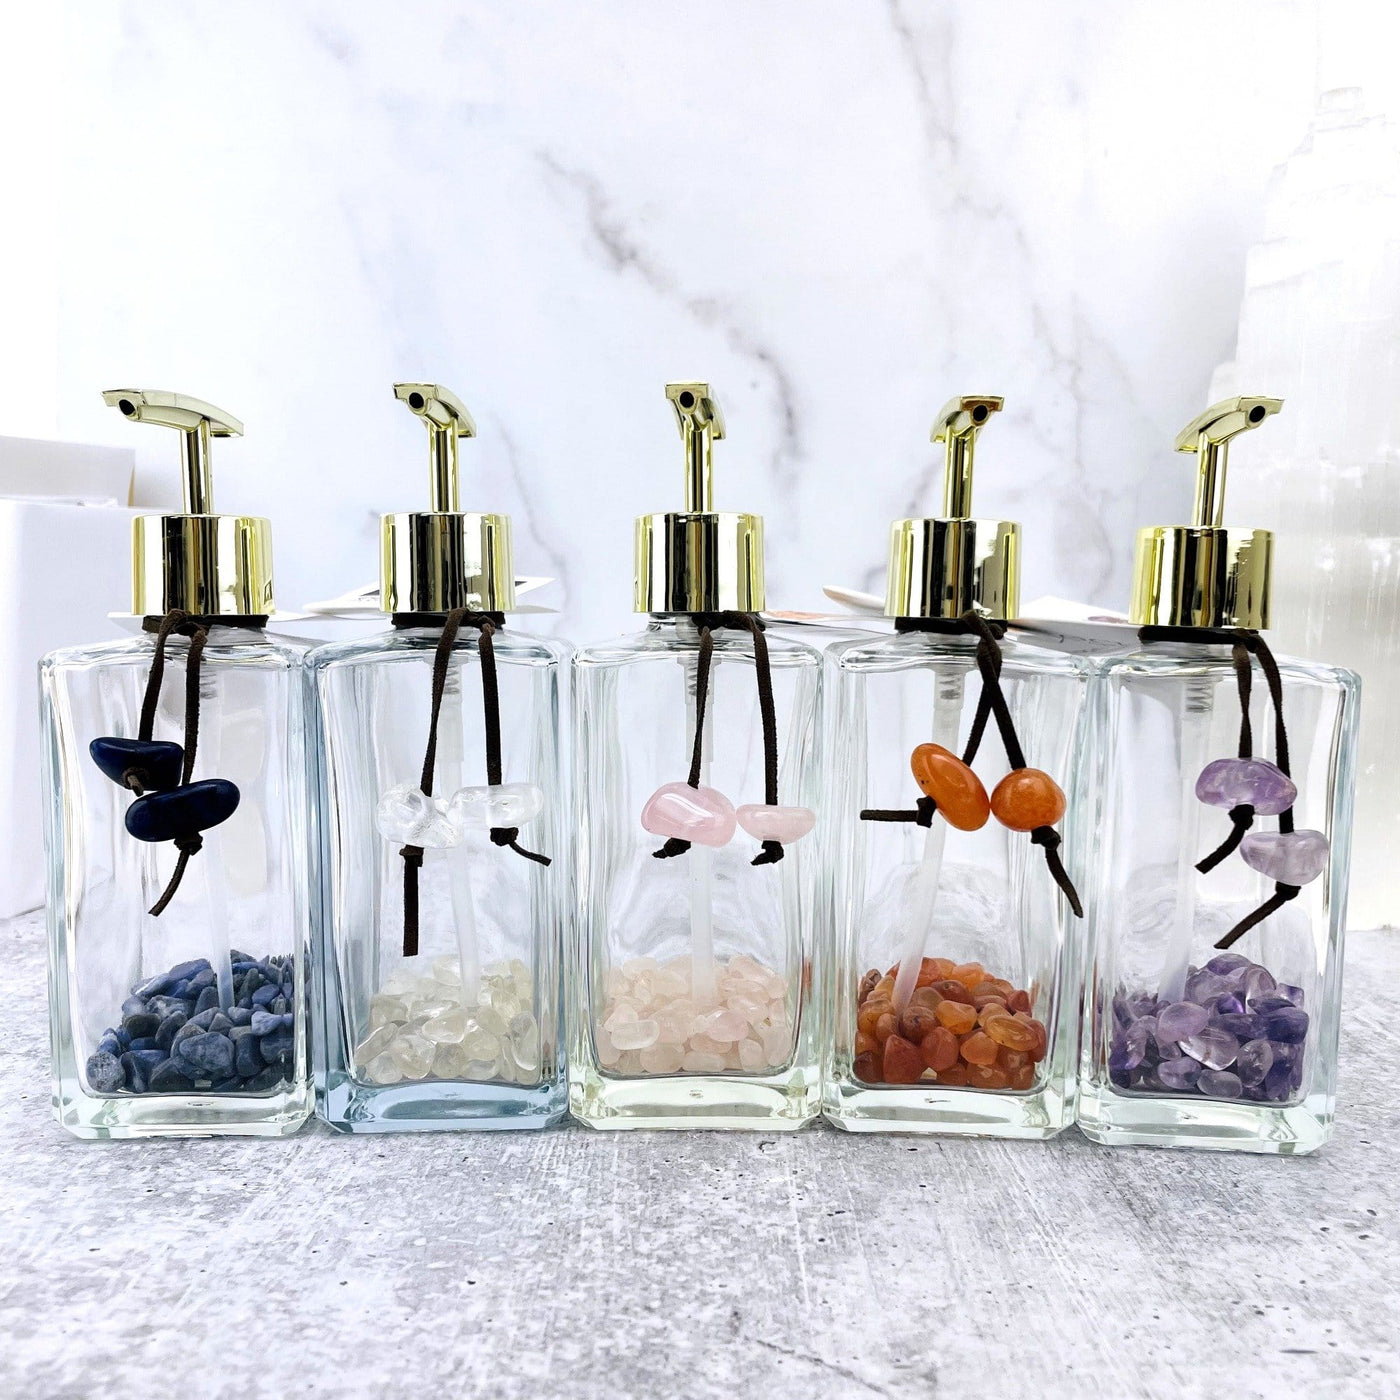 Tumbled Stone Soap Dispensers in a row, one of each stone available, sodalite, crystal quartz, rose quartz, carnelian, and amethyst